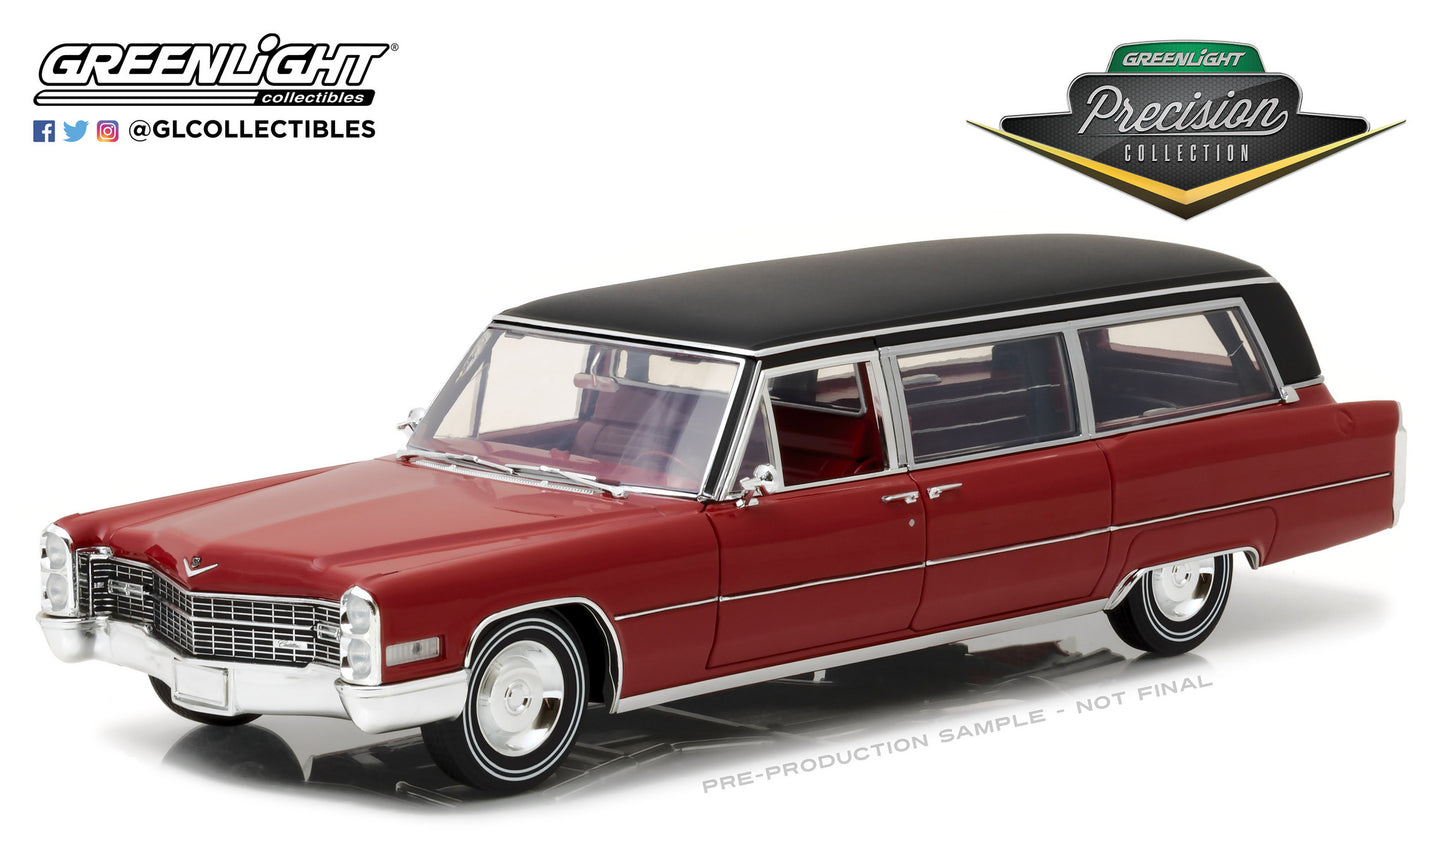 GreenLight 1/18 Precision Collection - 1:18 1966 Cadillac S&S Limousine - Red with Black Vinyl Roof PC-18008